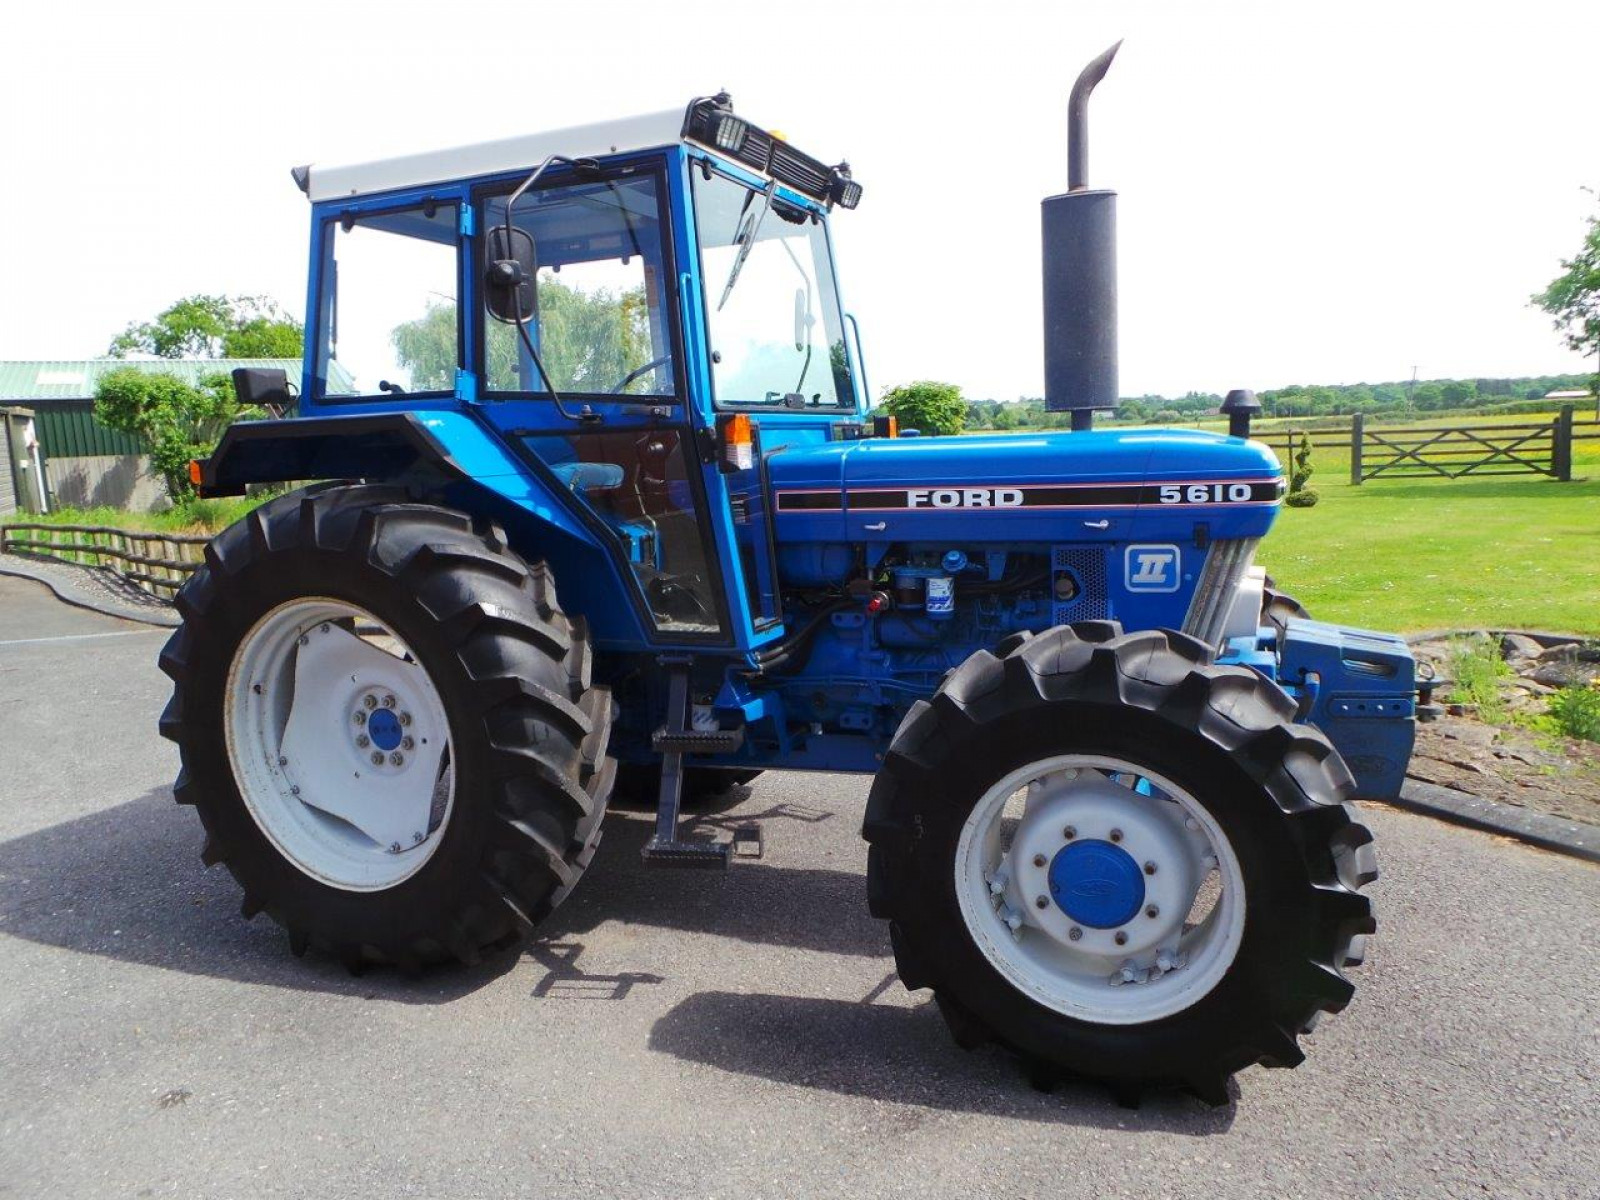 Quality Used Tractors For Sale